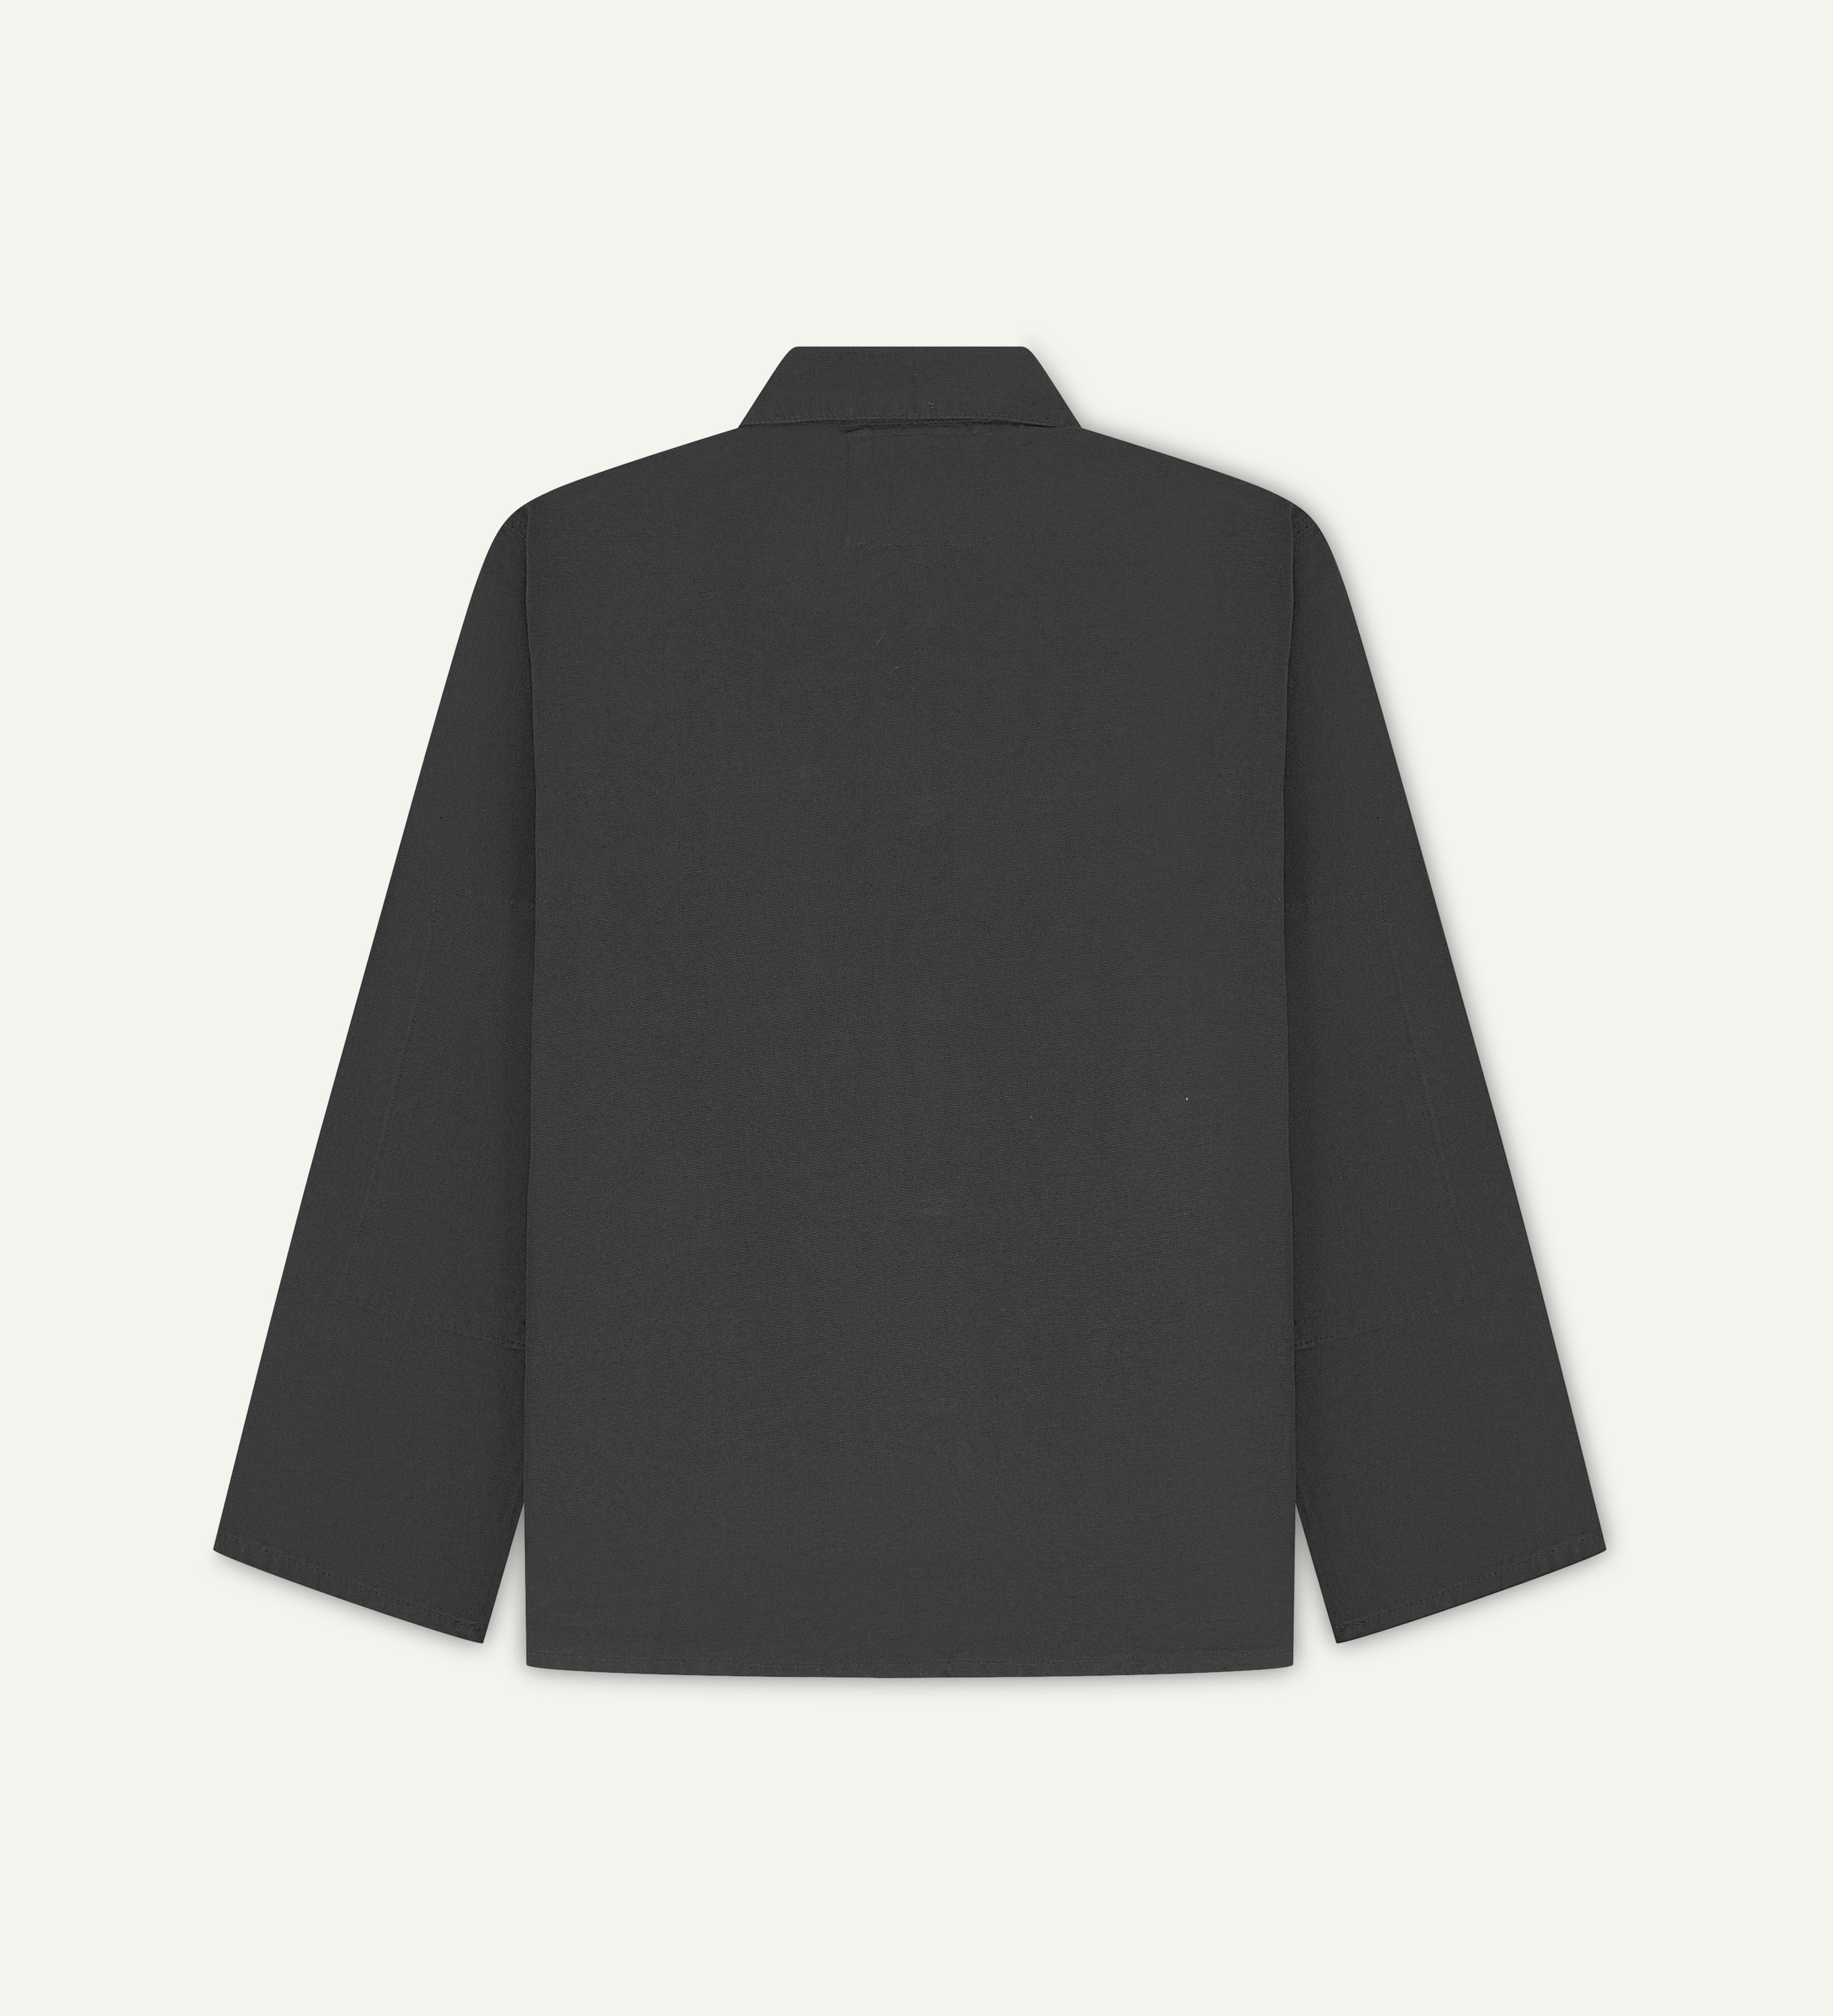 black men's overshirt  by uskees